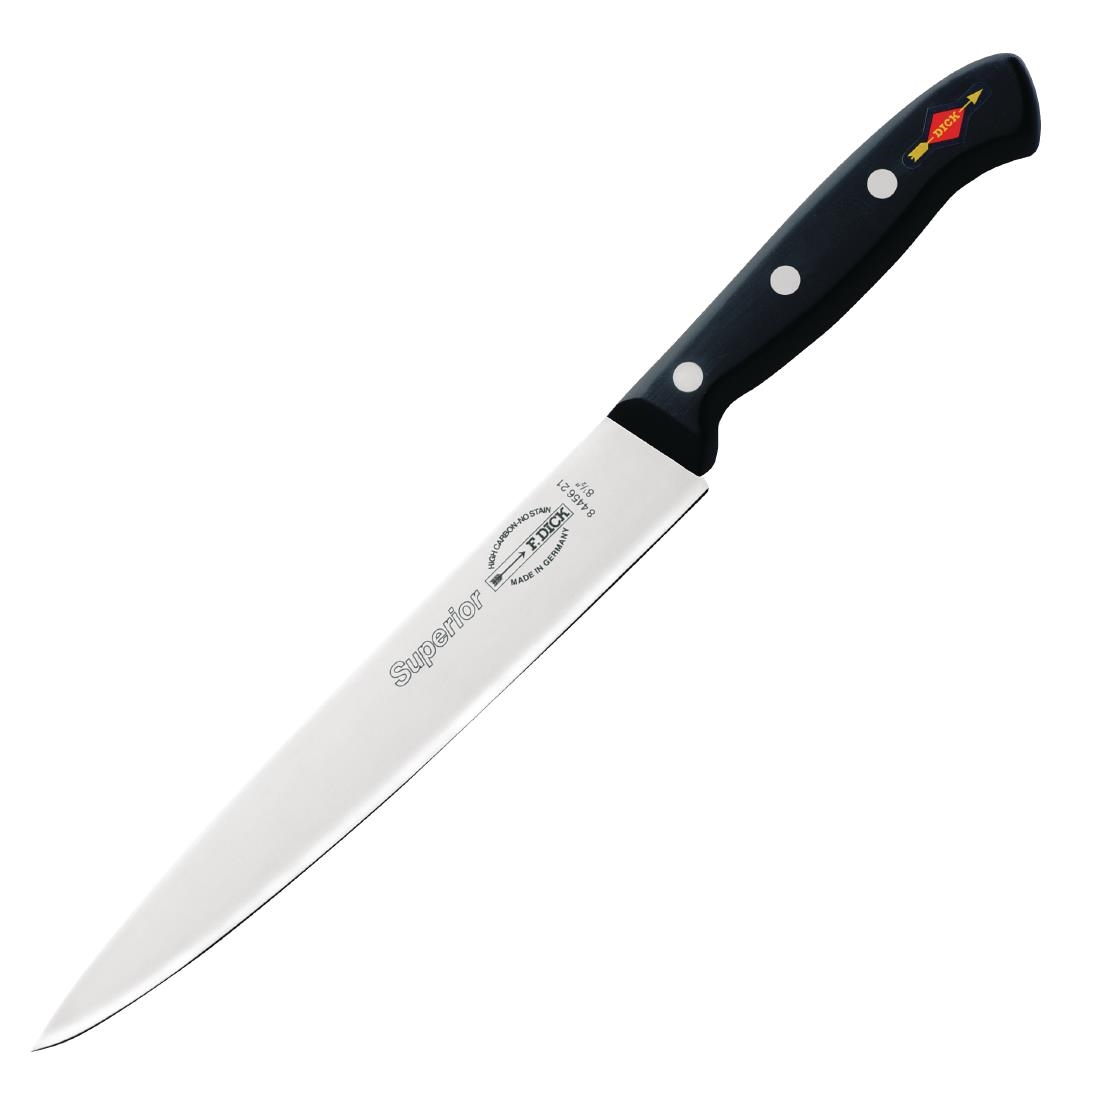 Dick Superior Carving Knife 8.5